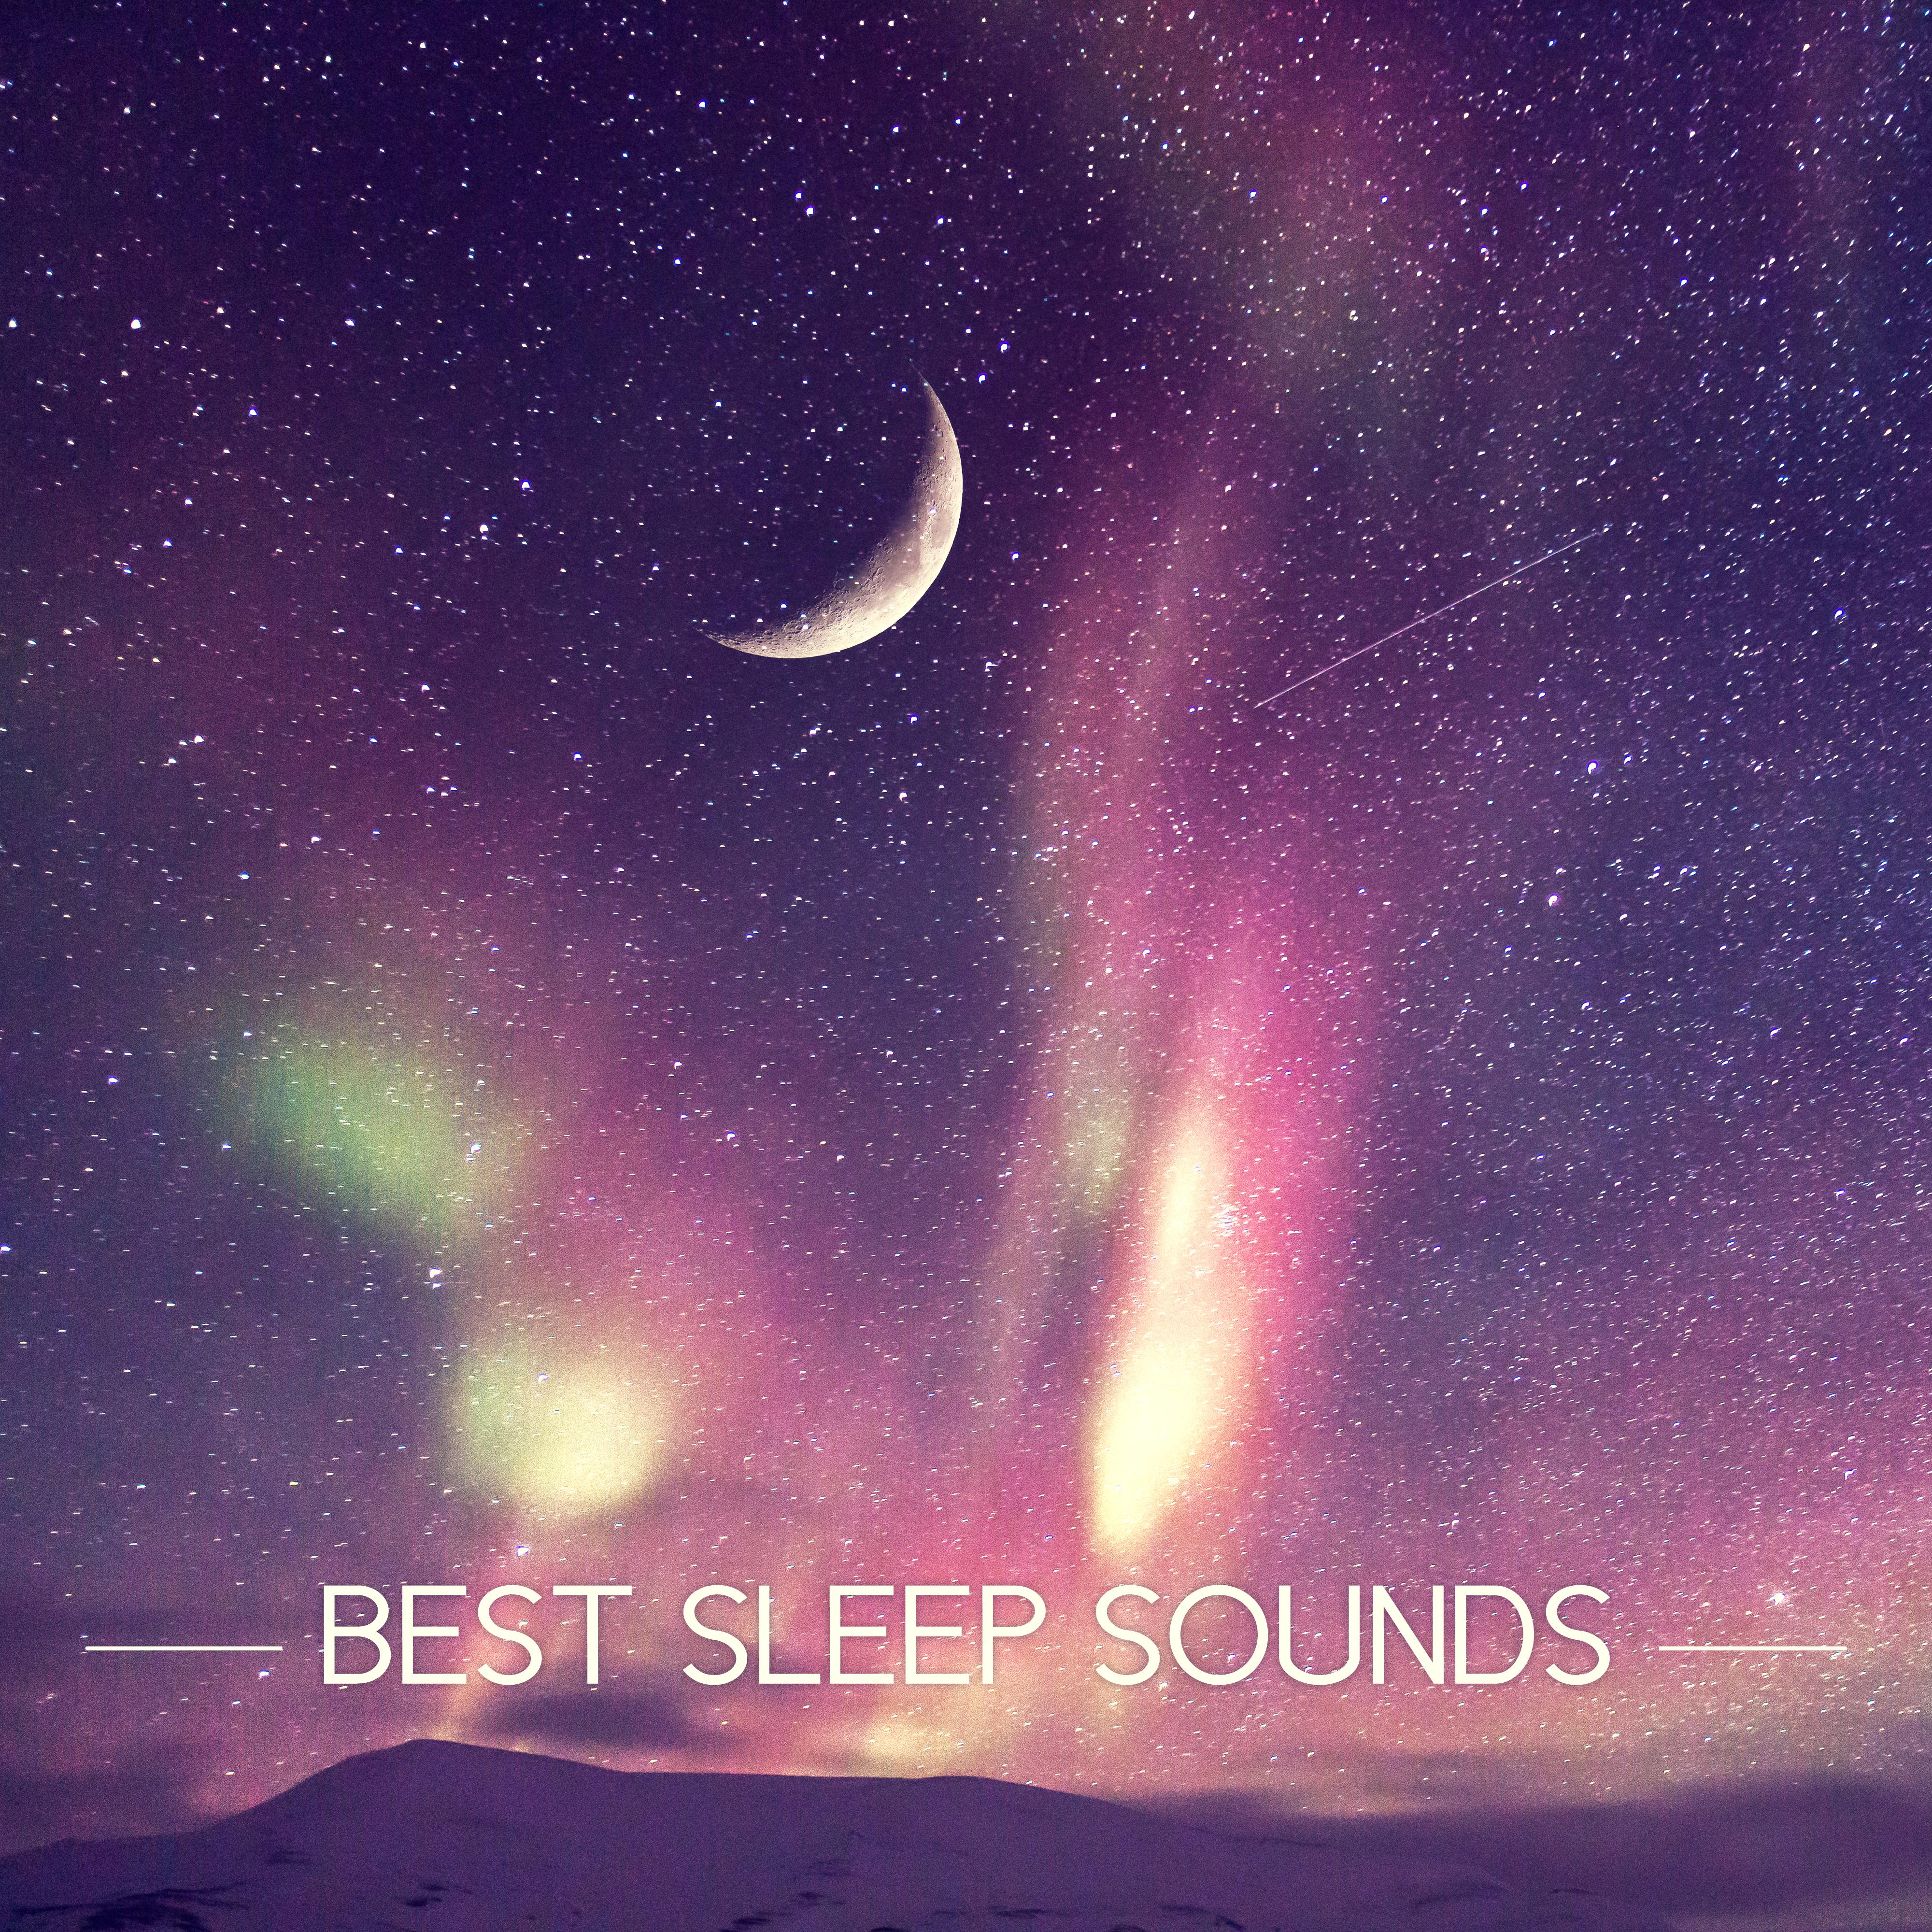 Best Sleep Sounds - Sleep Music to Help You Fall Asleep Easily, Natural Music for Healing Through Sound and Touch, Sentimental Journey with Sounds of Nature, Massage, Reiki, Luxury Spa